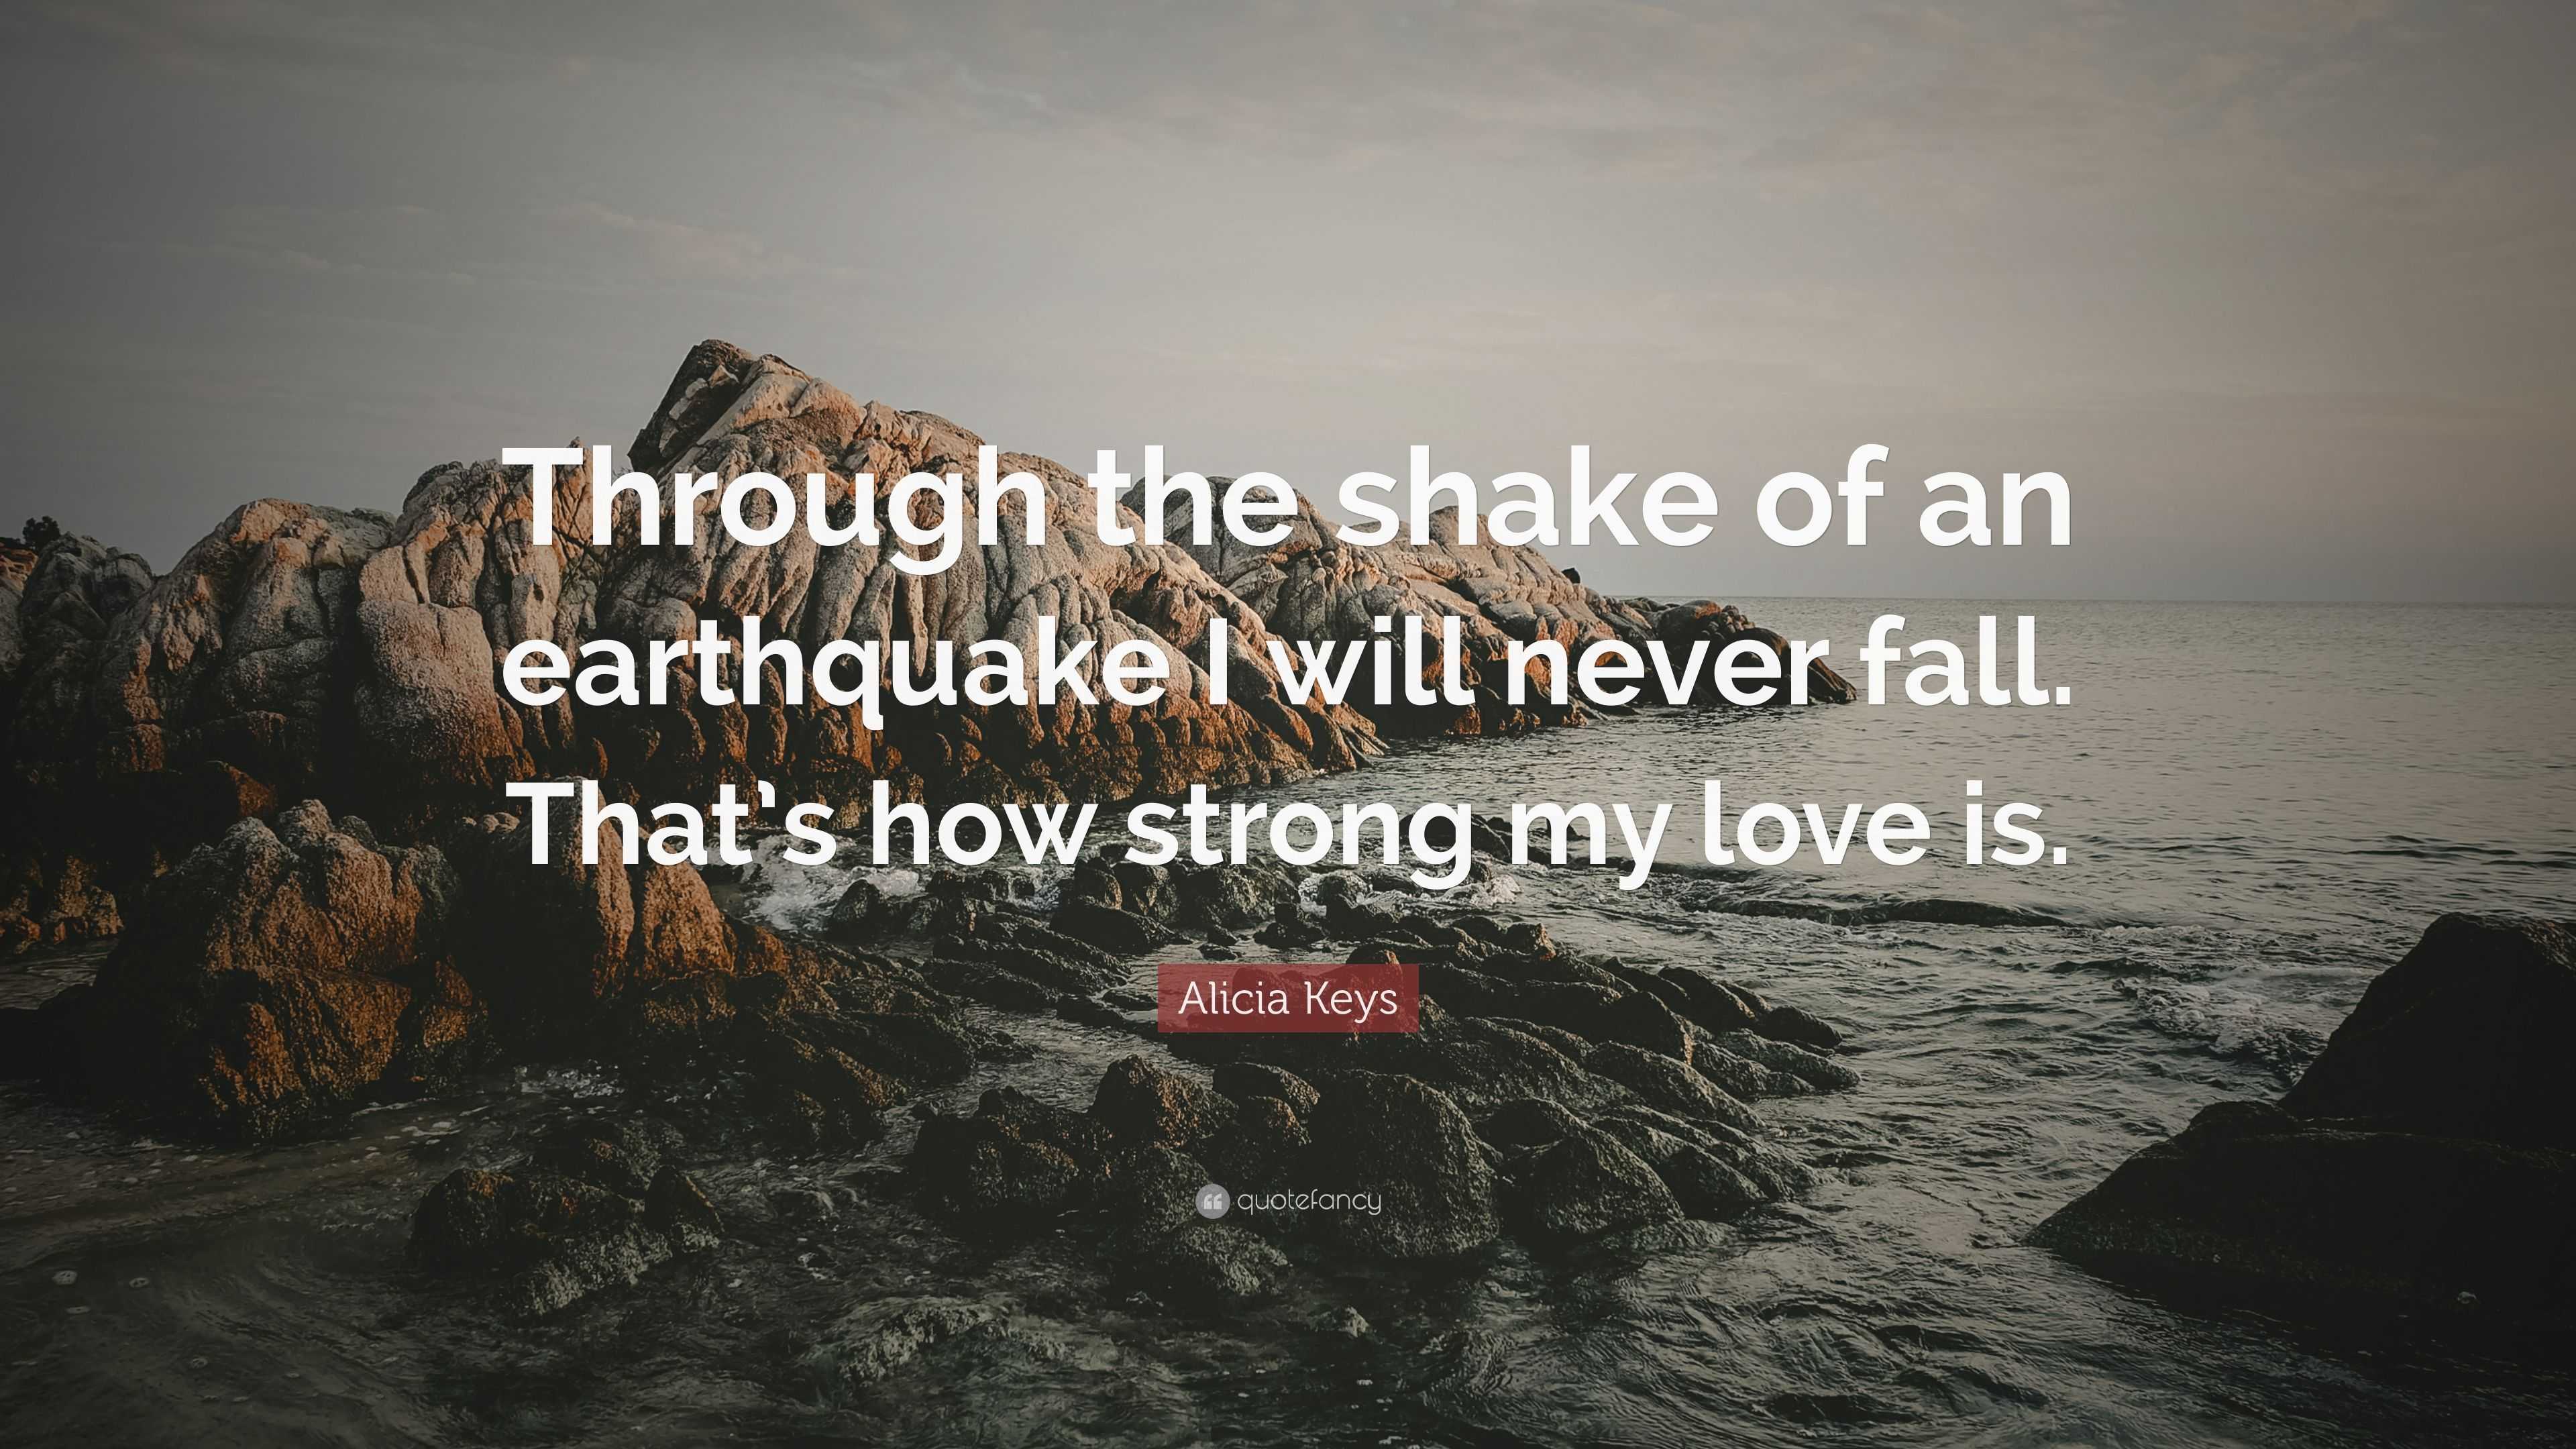 Alicia Keys Quote “through The Shake Of An Earthquake I Will Never Fall That’s How Strong My